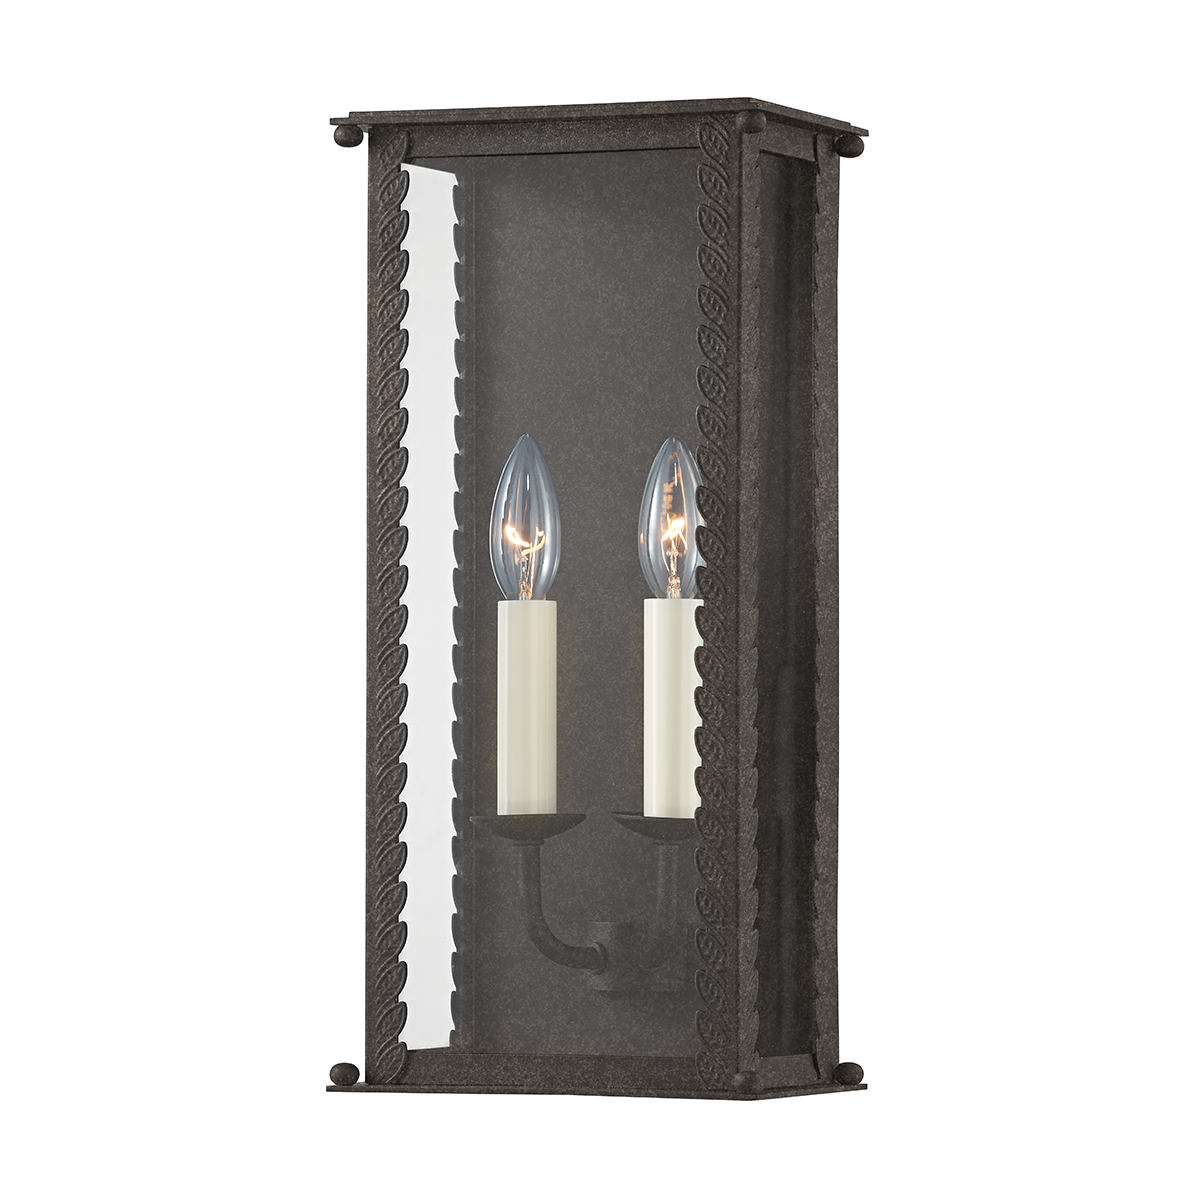 Troy Lighting 2 LIGHT MEDIUM EXTERIOR WALL SCONCE B6712 Outdoor l Wall Troy Lighting FRENCH IRON  